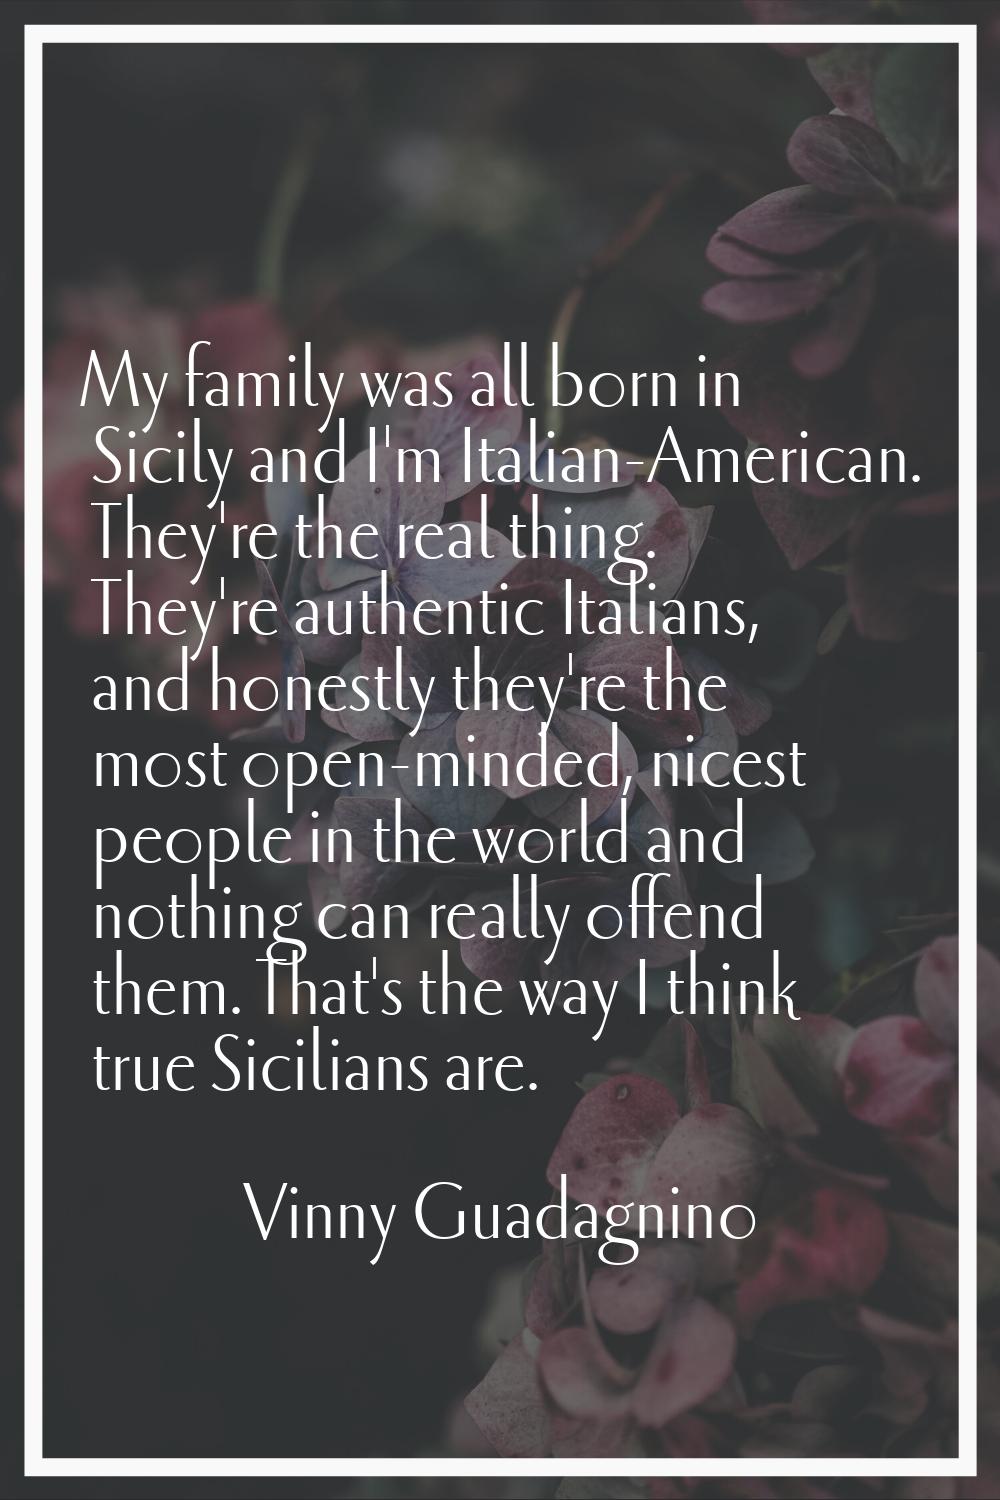 My family was all born in Sicily and I'm Italian-American. They're the real thing. They're authenti